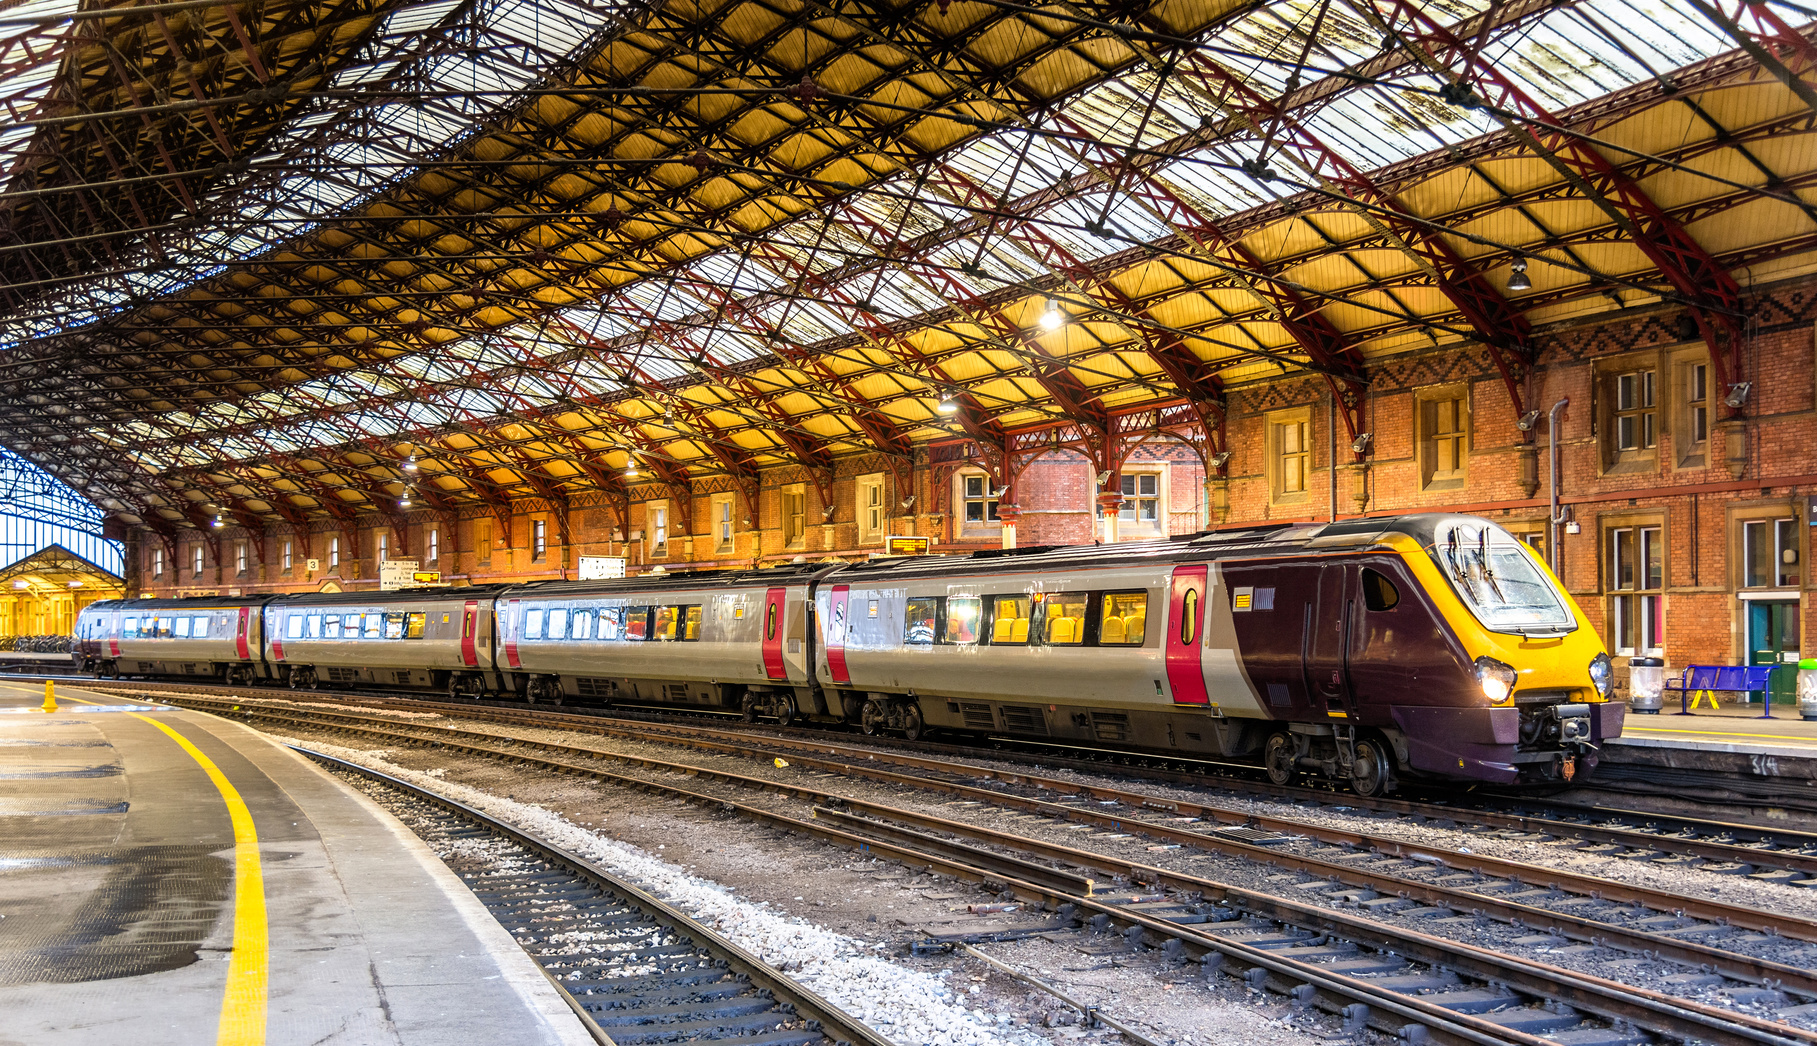 Passenger train at Bristol Temple Meads Railway Station, England